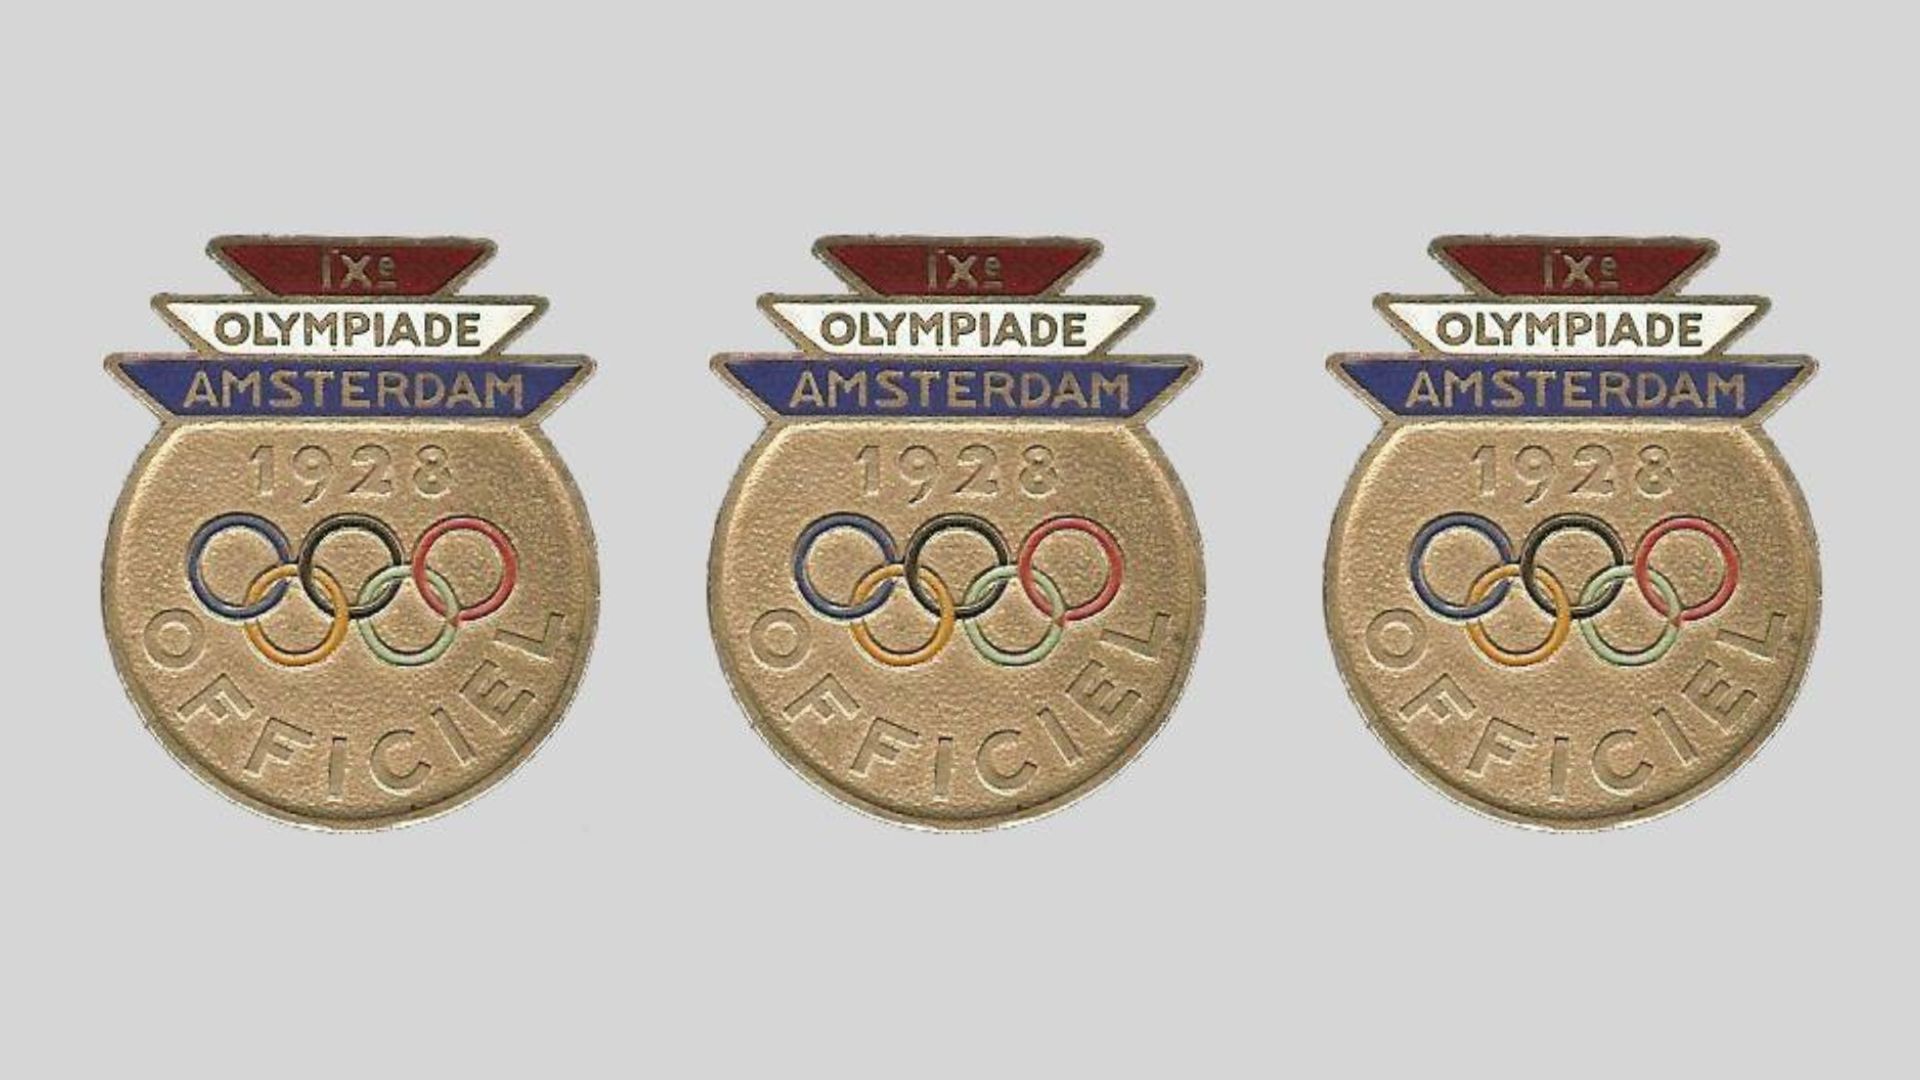 1928 Olympic Games